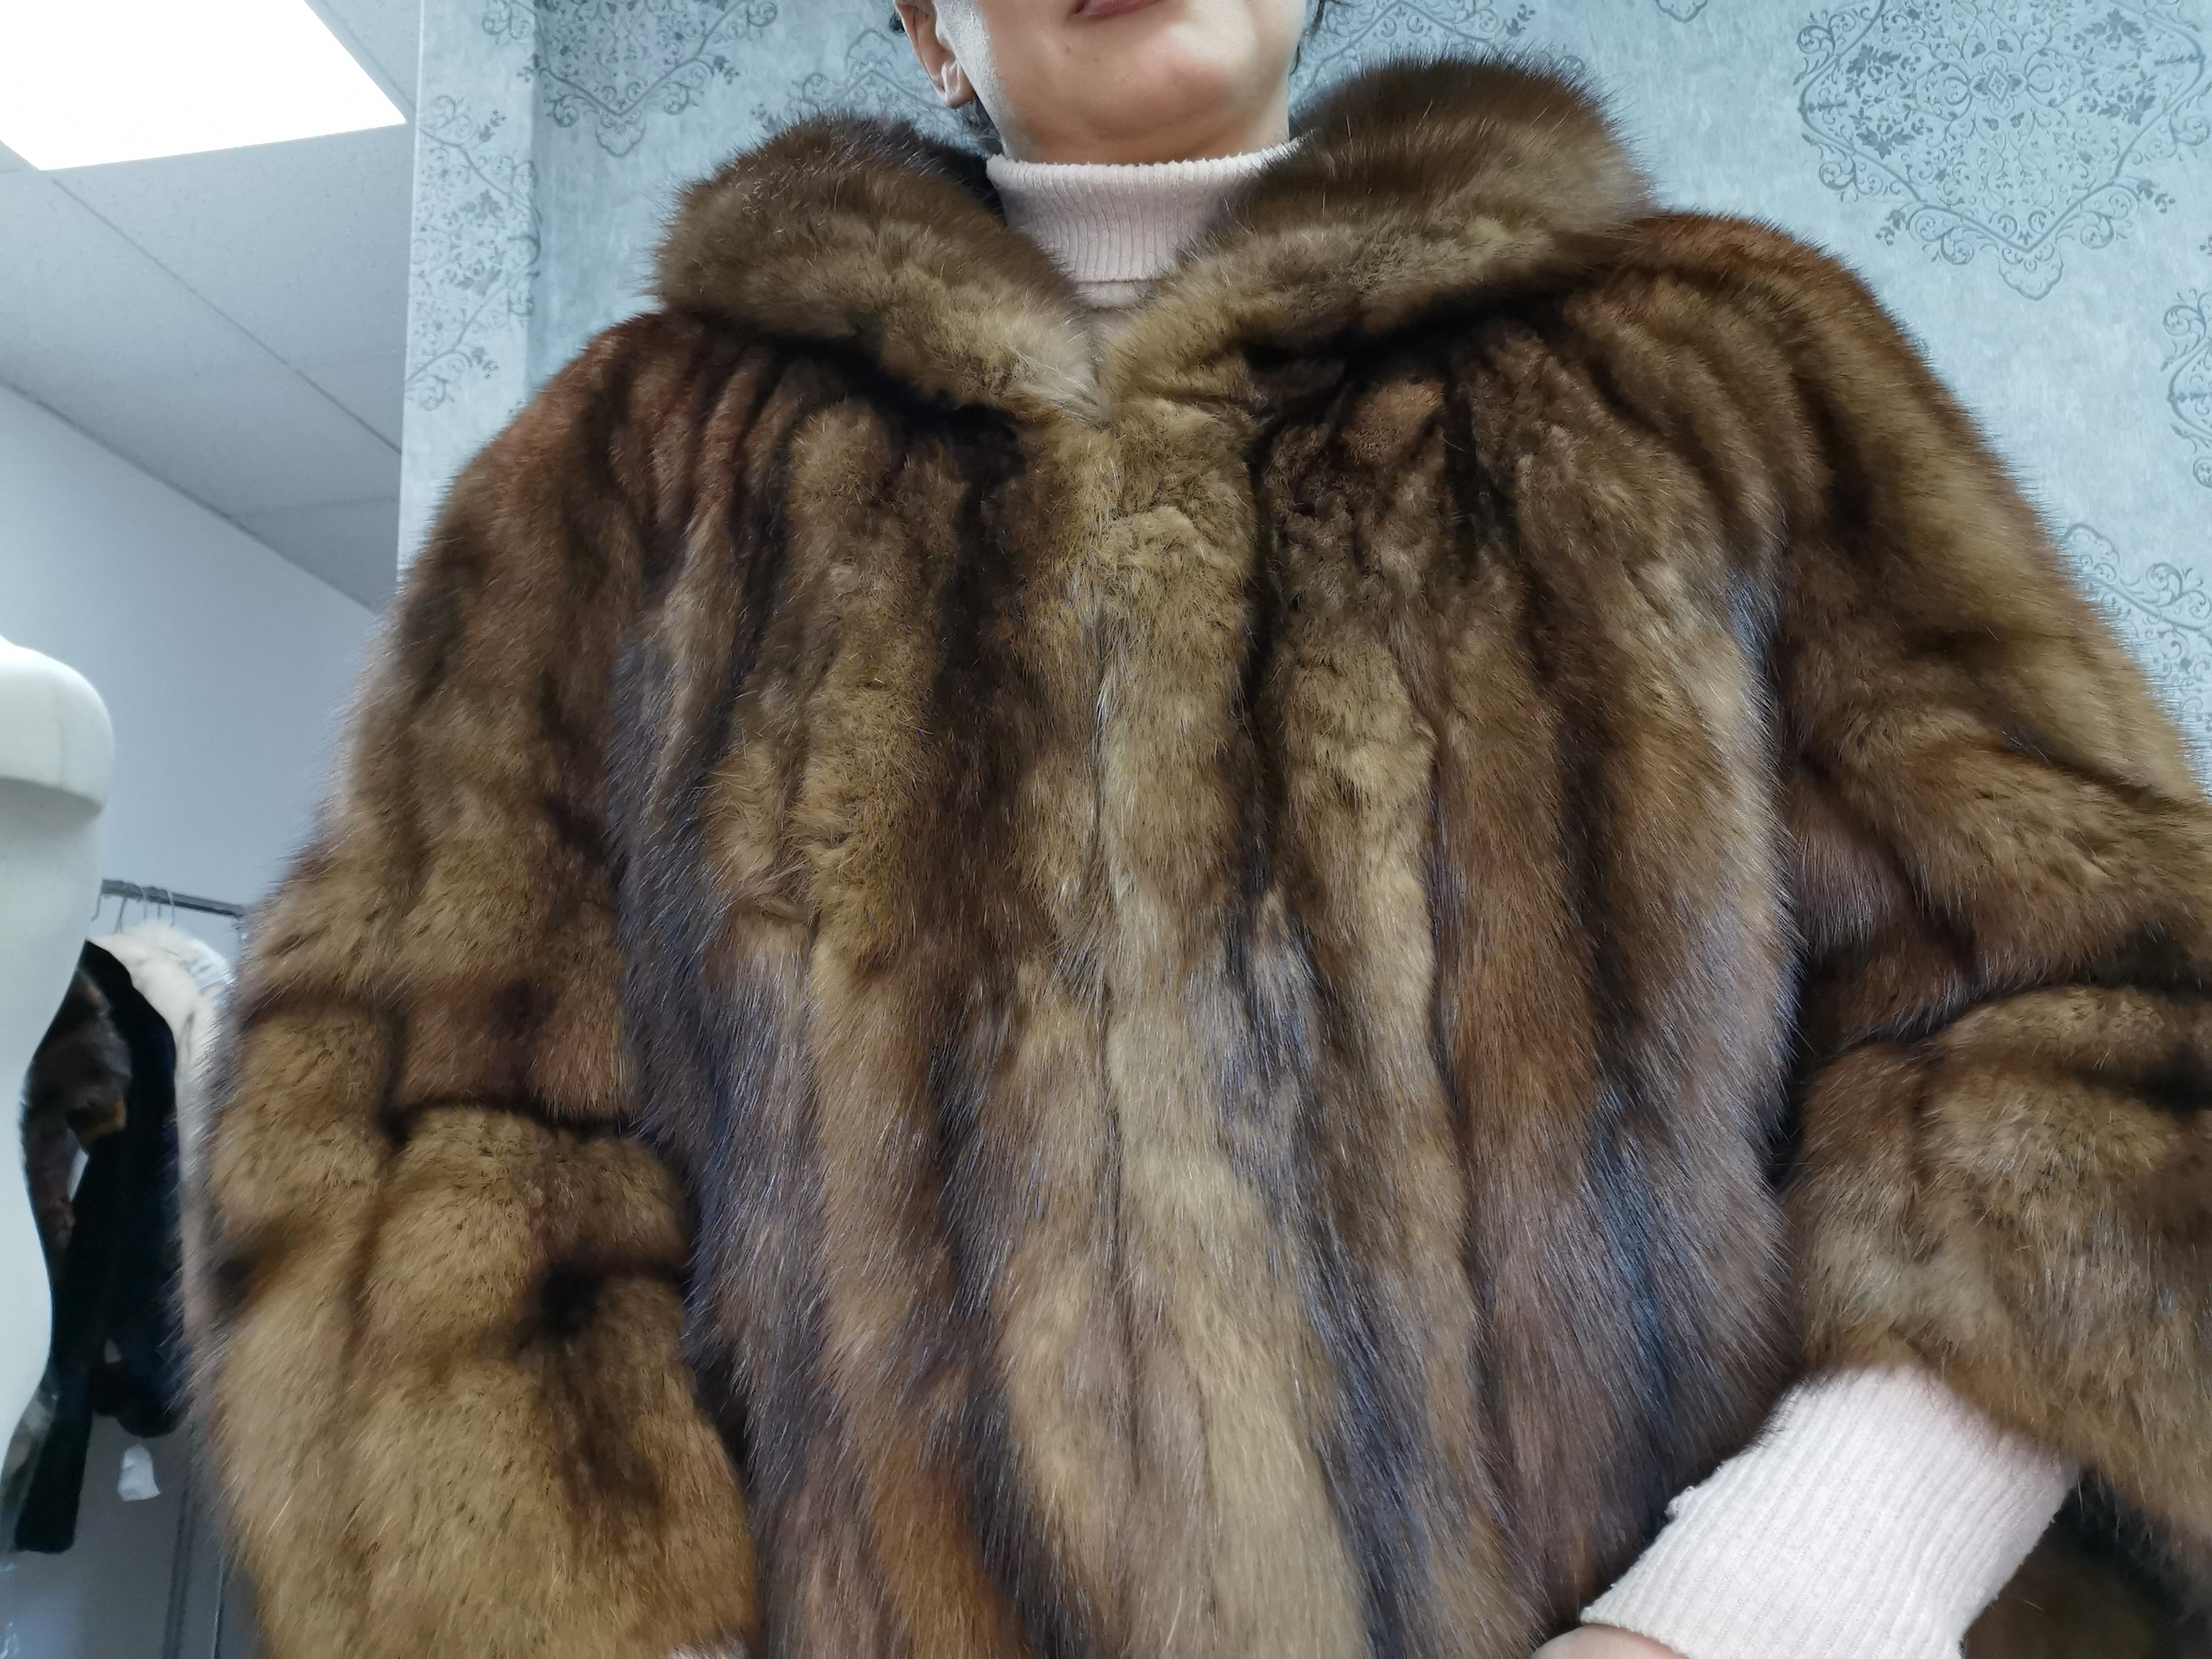 DESCRIPTION : SABLE FUR COAT WITH A BRAND NEW LINNING SIZE 8

Portrait collar, supple skins, beautiful fresh fur, hook and eye  for closure, too slit pockets, nice big full pelts skins in excellent condition.

MEASUREMENTS :

SIZE :8

LENGTH